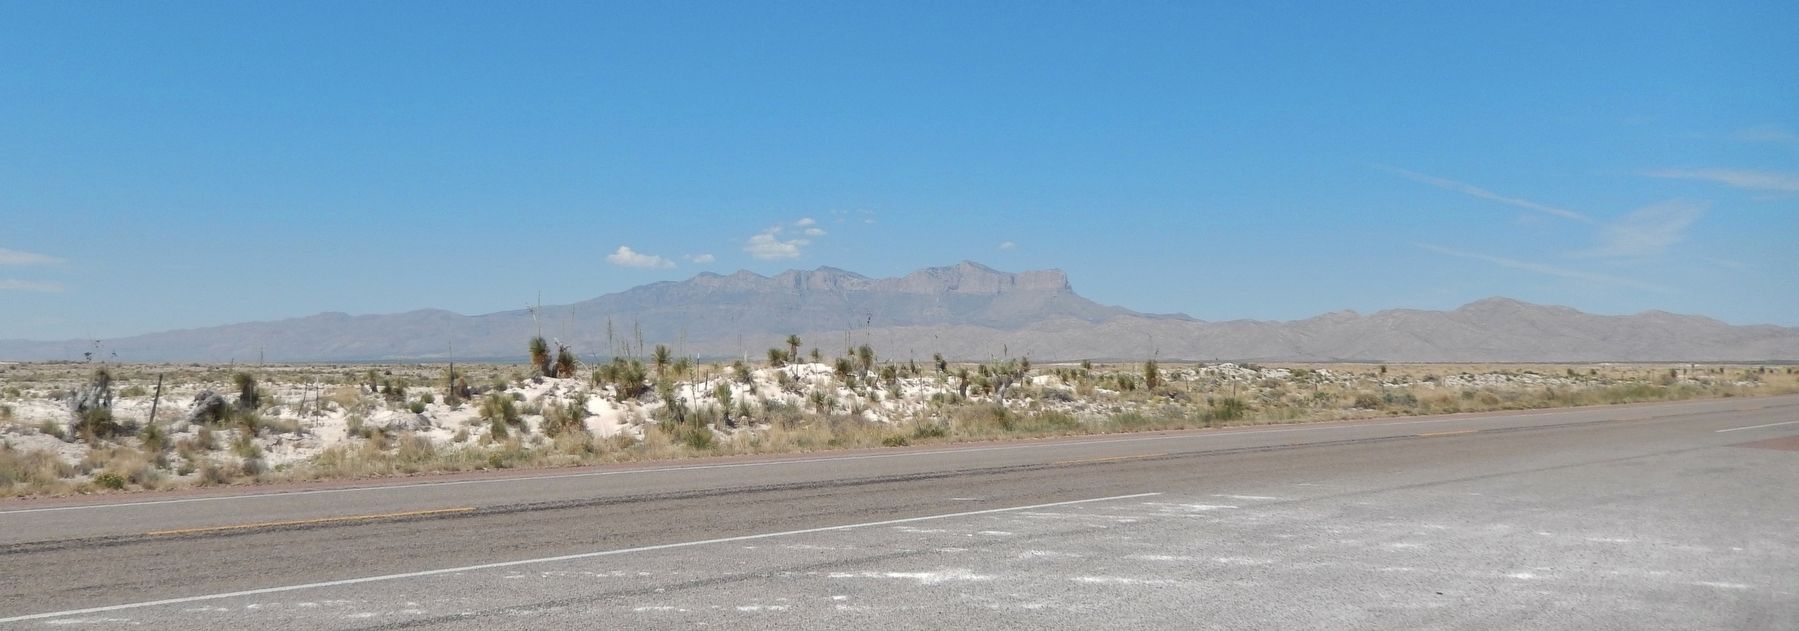 U.S. Highway 62/180 and Guadalupe Mountains (<i>view looking northeast from marker</i>) image. Click for full size.